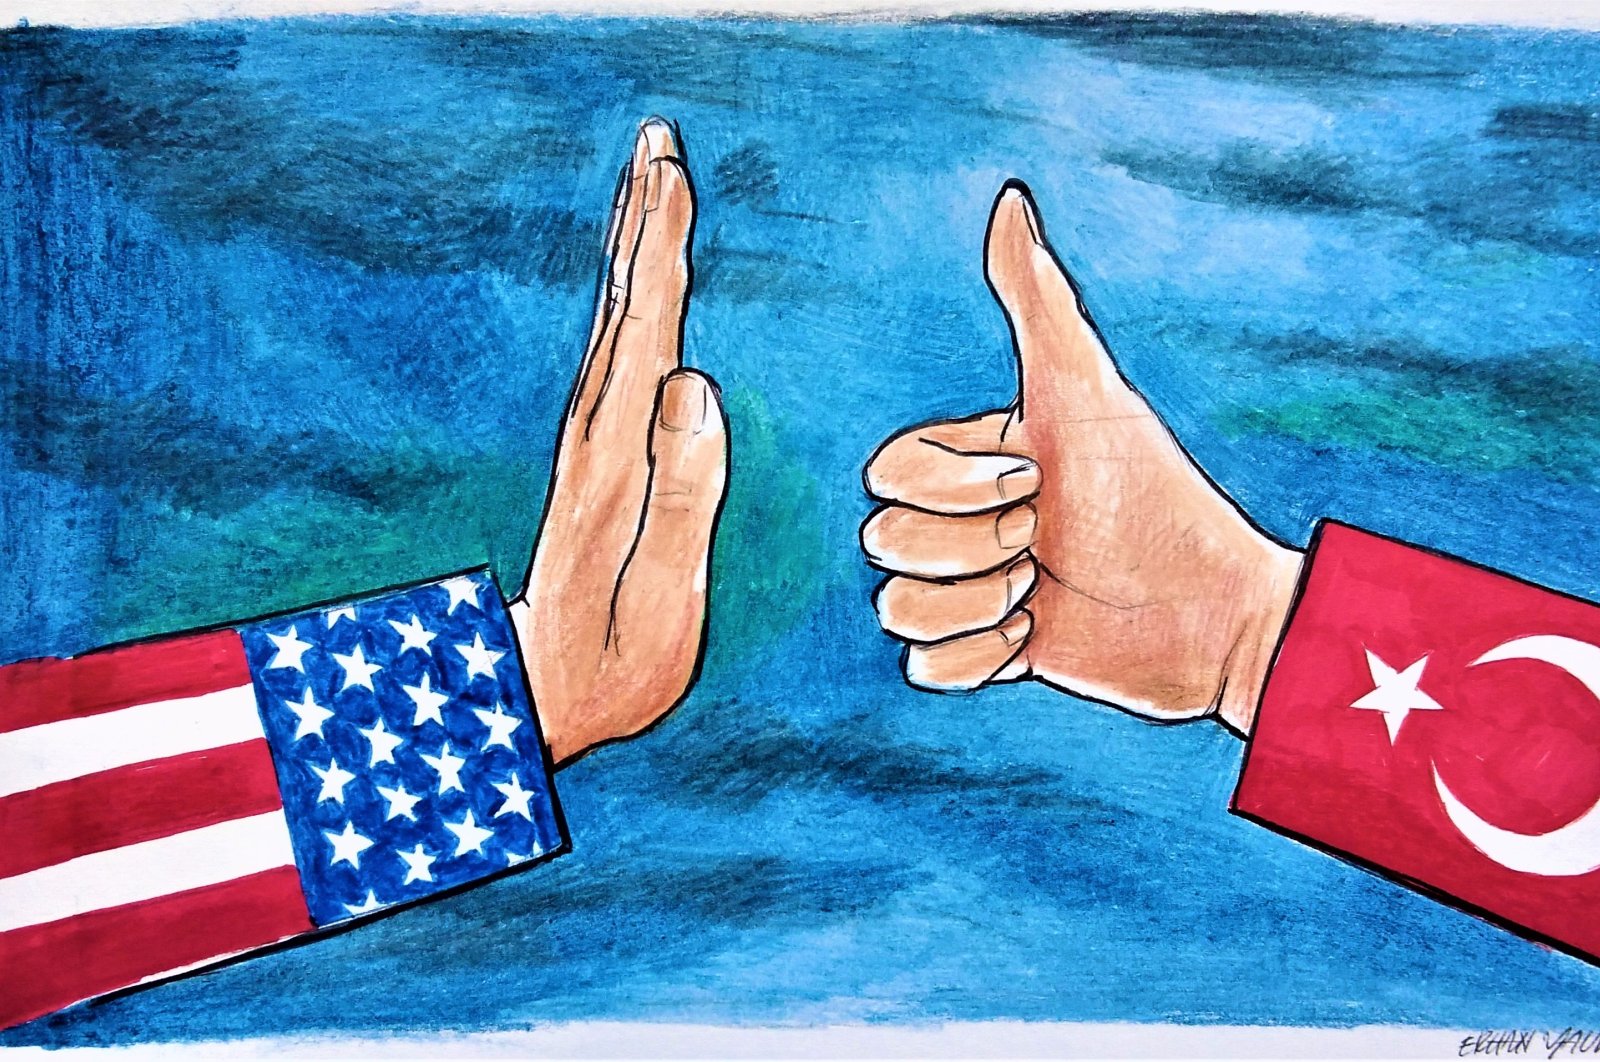 Instead of being dragged along by the U.S. and its like-minded partners in Europe, Türkiye is prospering and stands on its own two feet. (Illustration by Erhan Yalvaç)